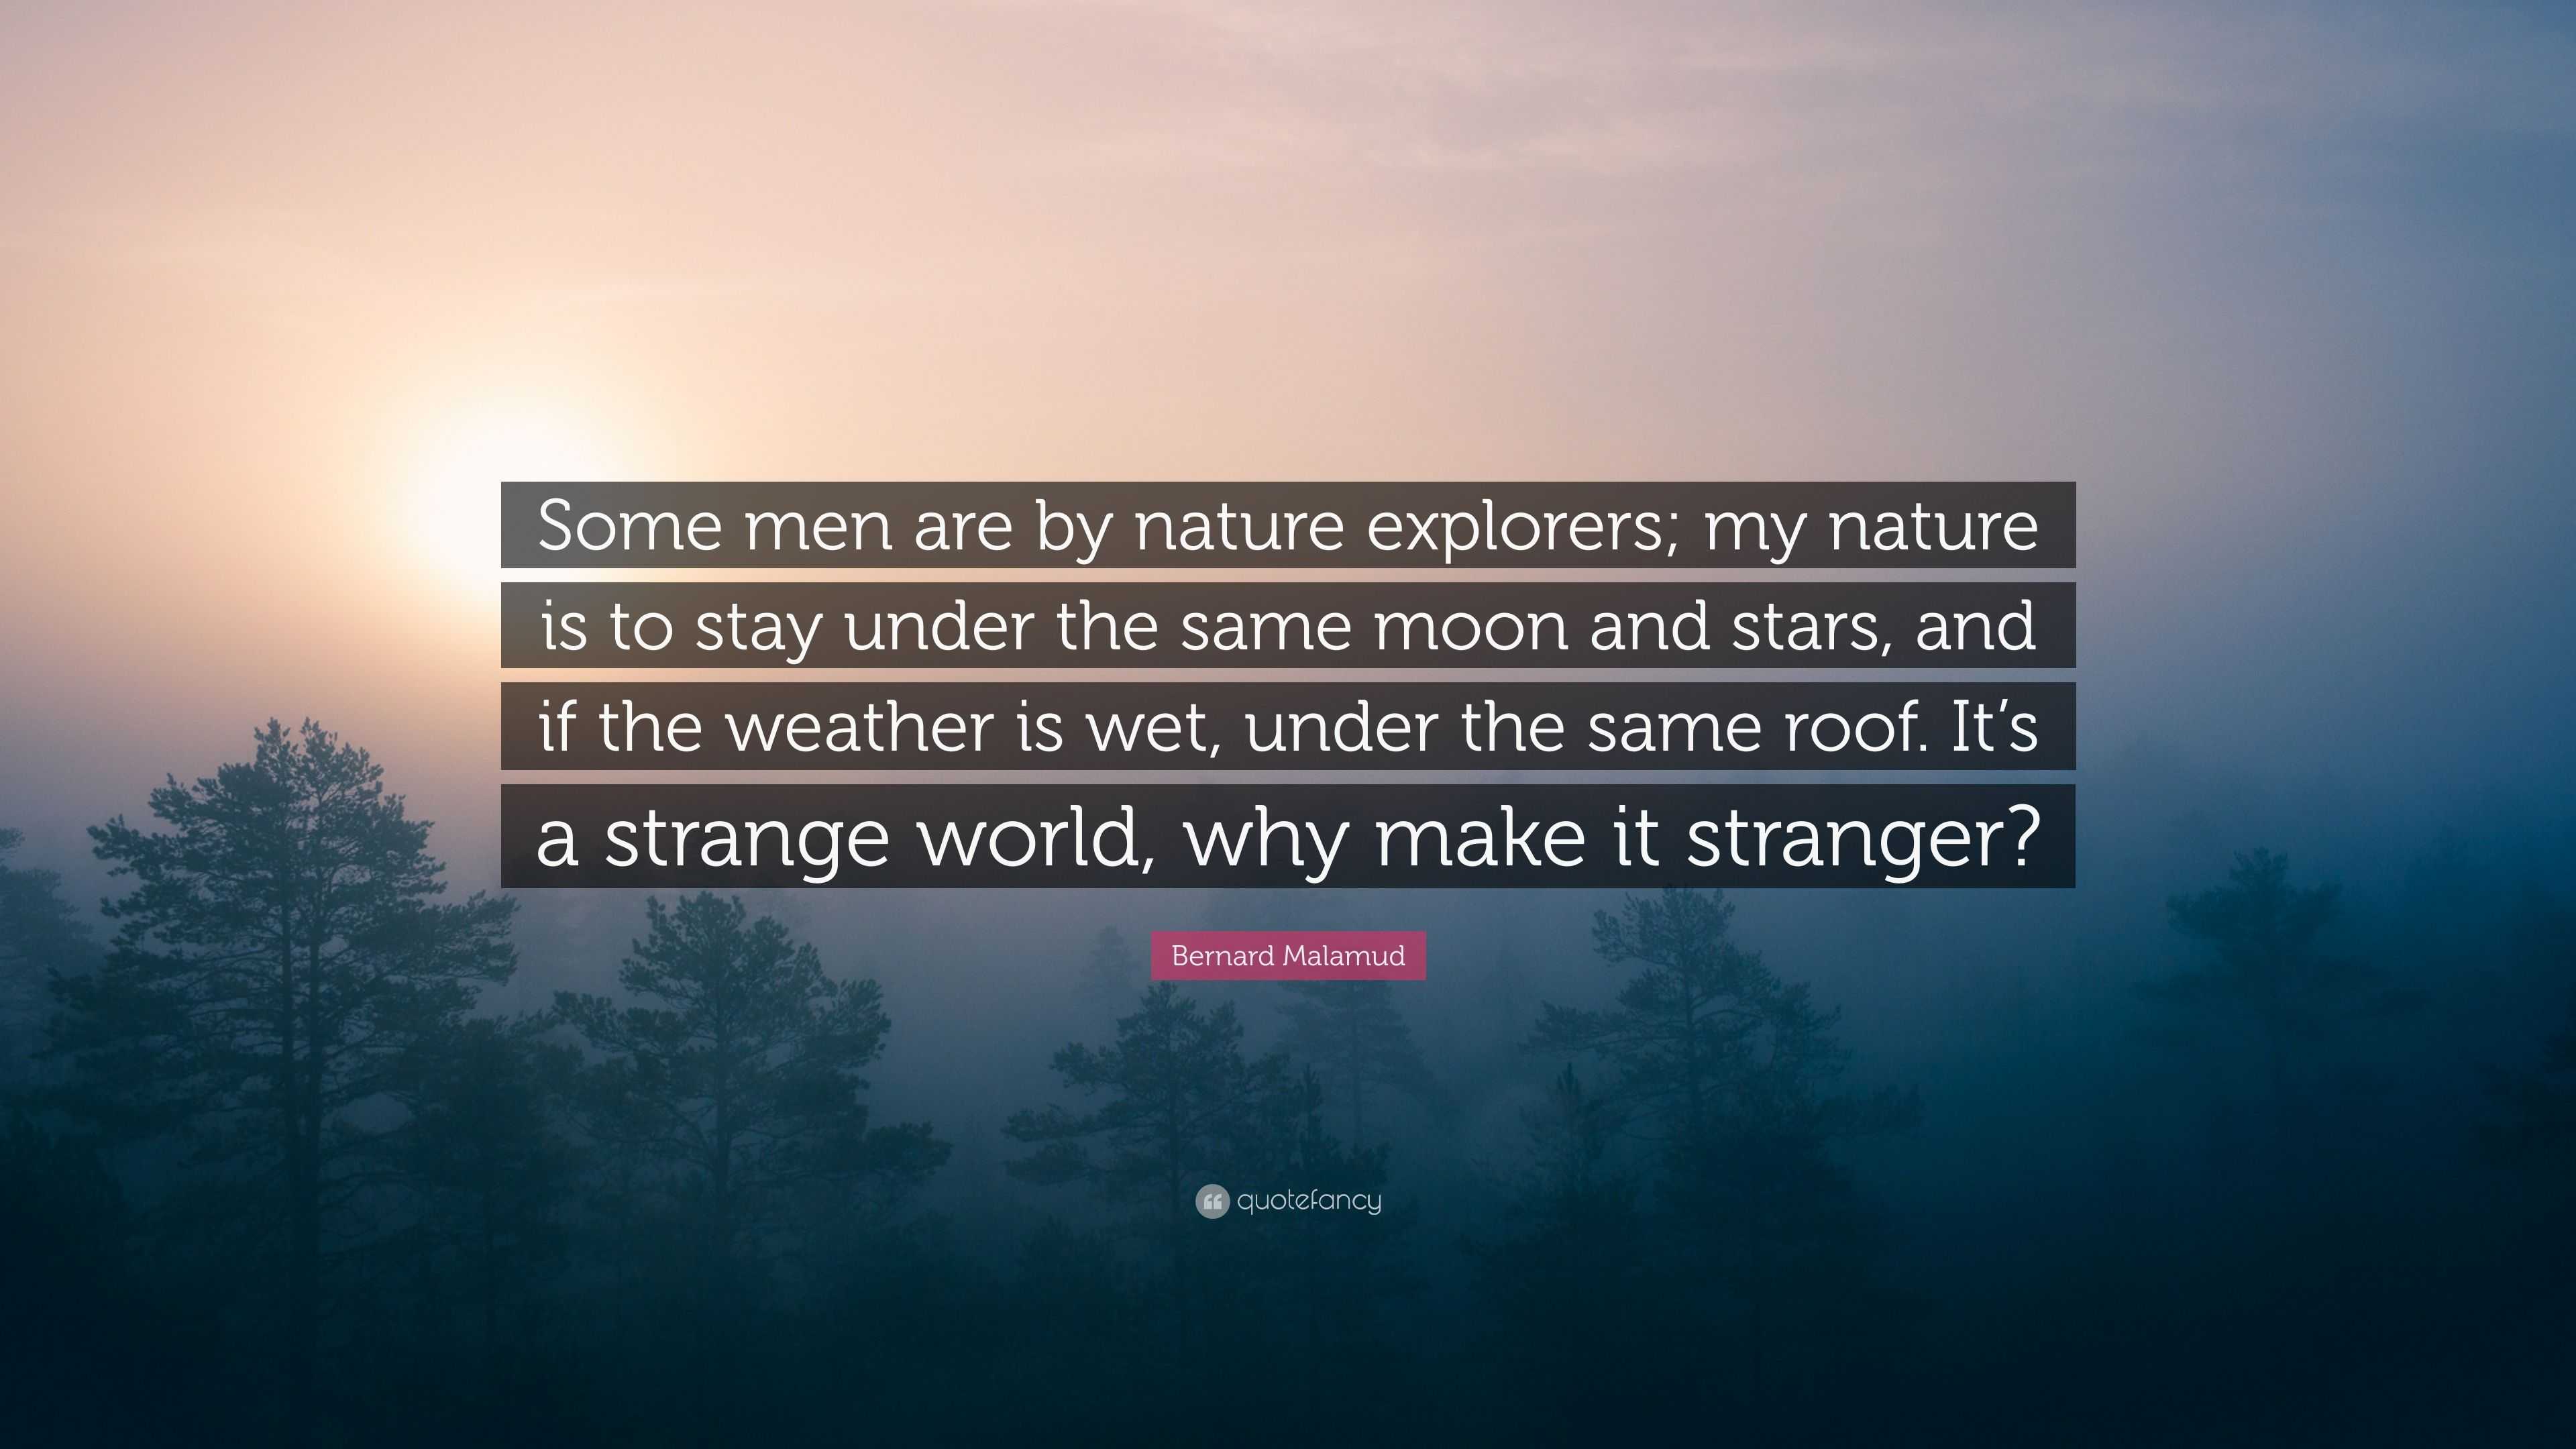 Bernard Malamud Quote Some Men Are By Nature Explorers My Nature Is To Stay Under The Same Moon And Stars And If The Weather Is Wet Under T